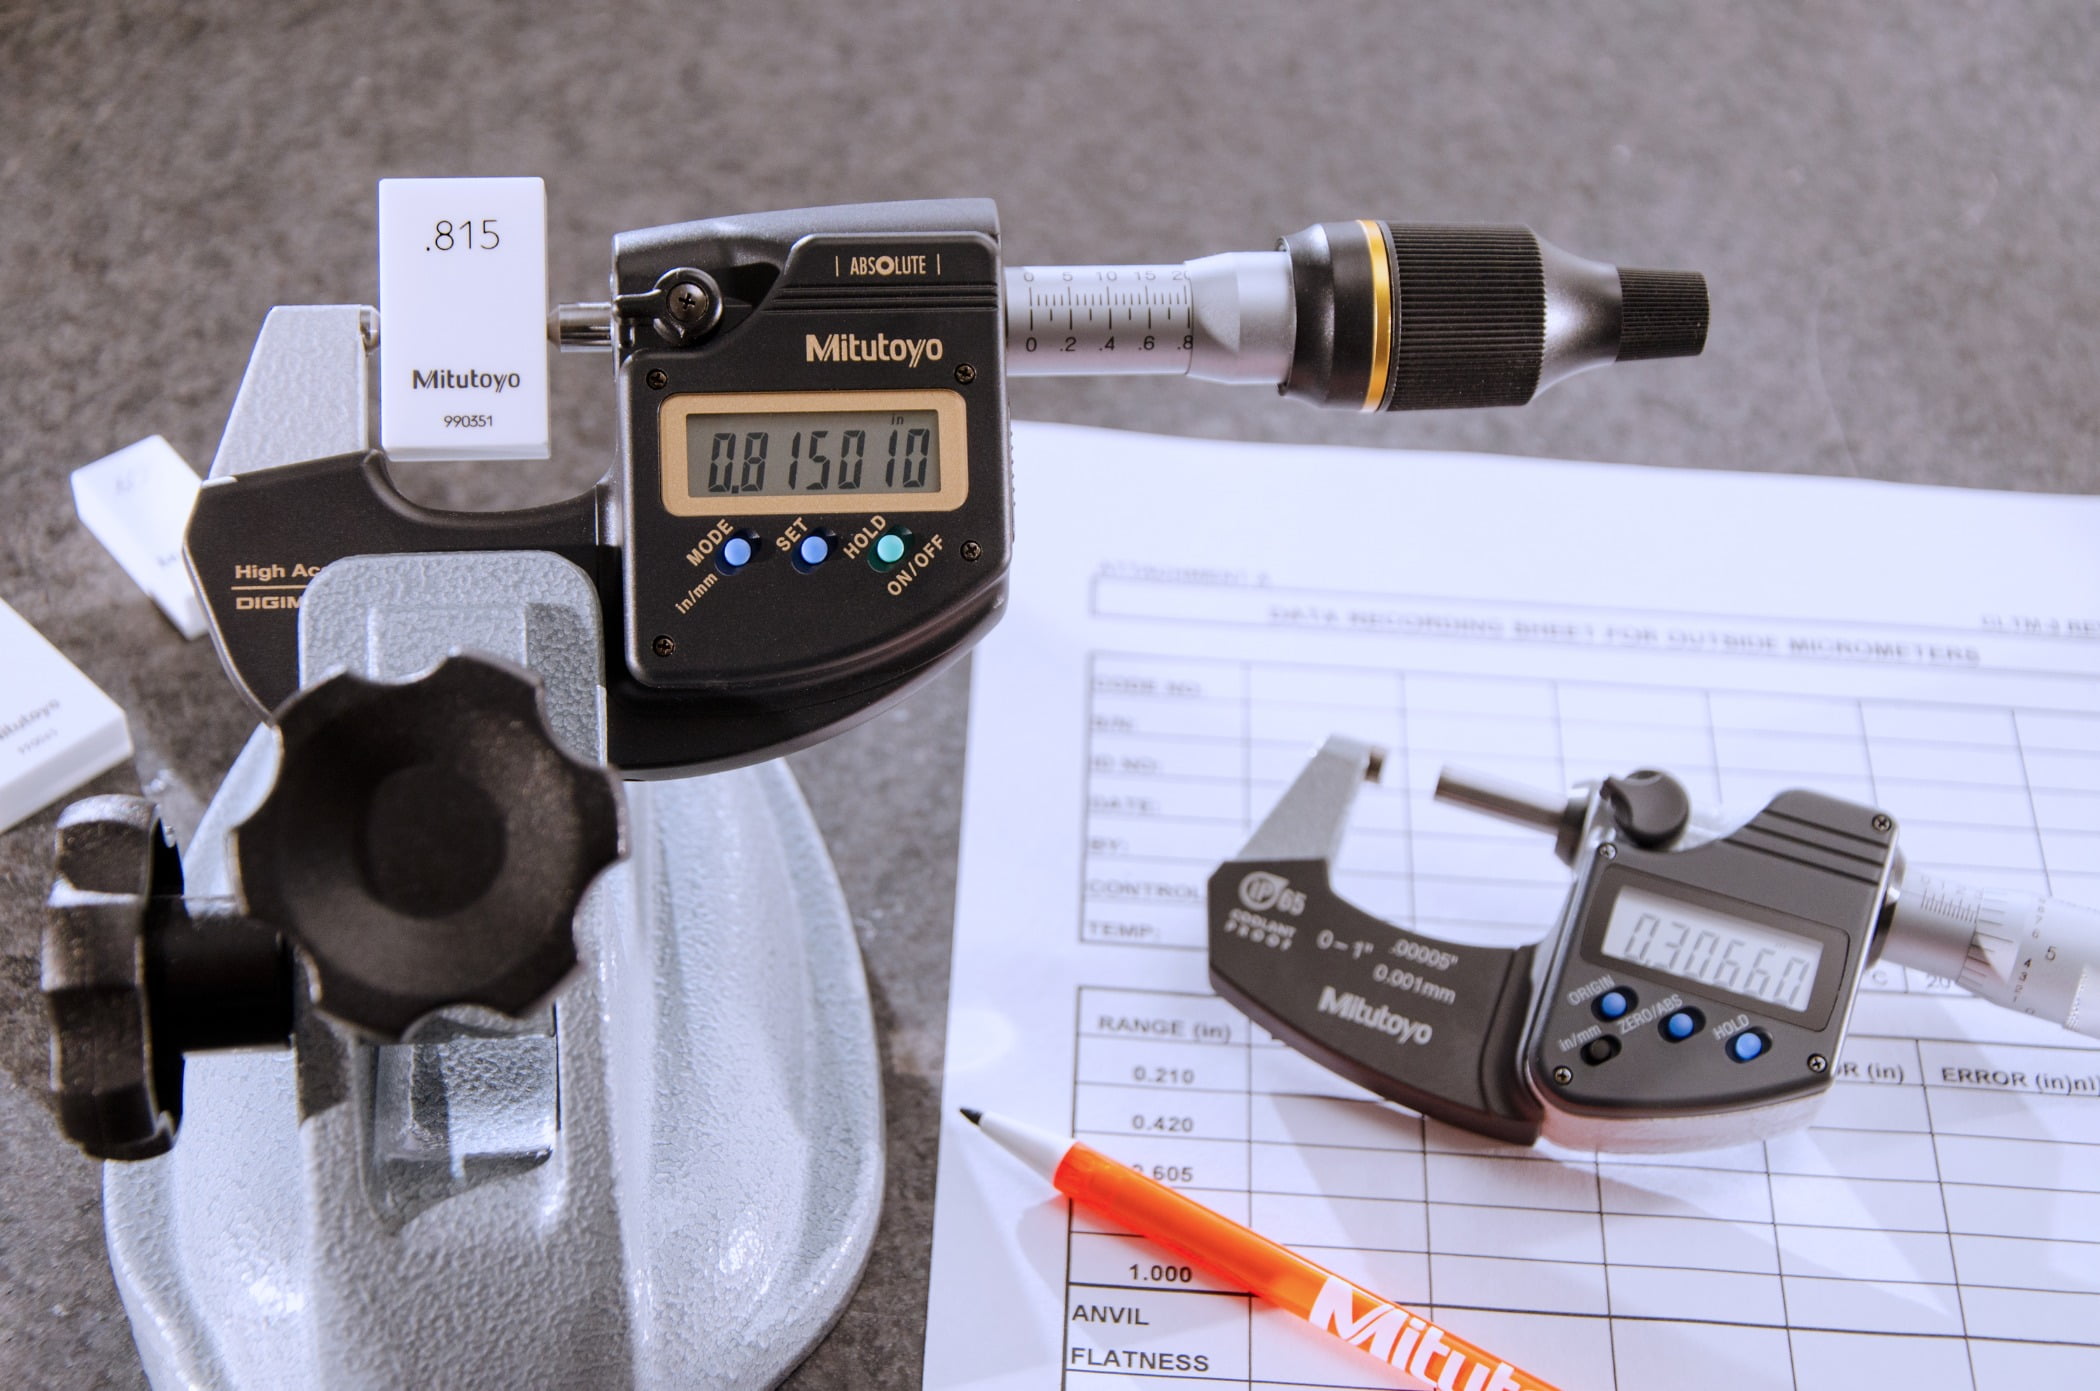 Calibration of measuring instruments, such as a micrometer, is integral to maintaining quality standards. A gage block is still the most accurate method of checking linear range accuracy for small tools.